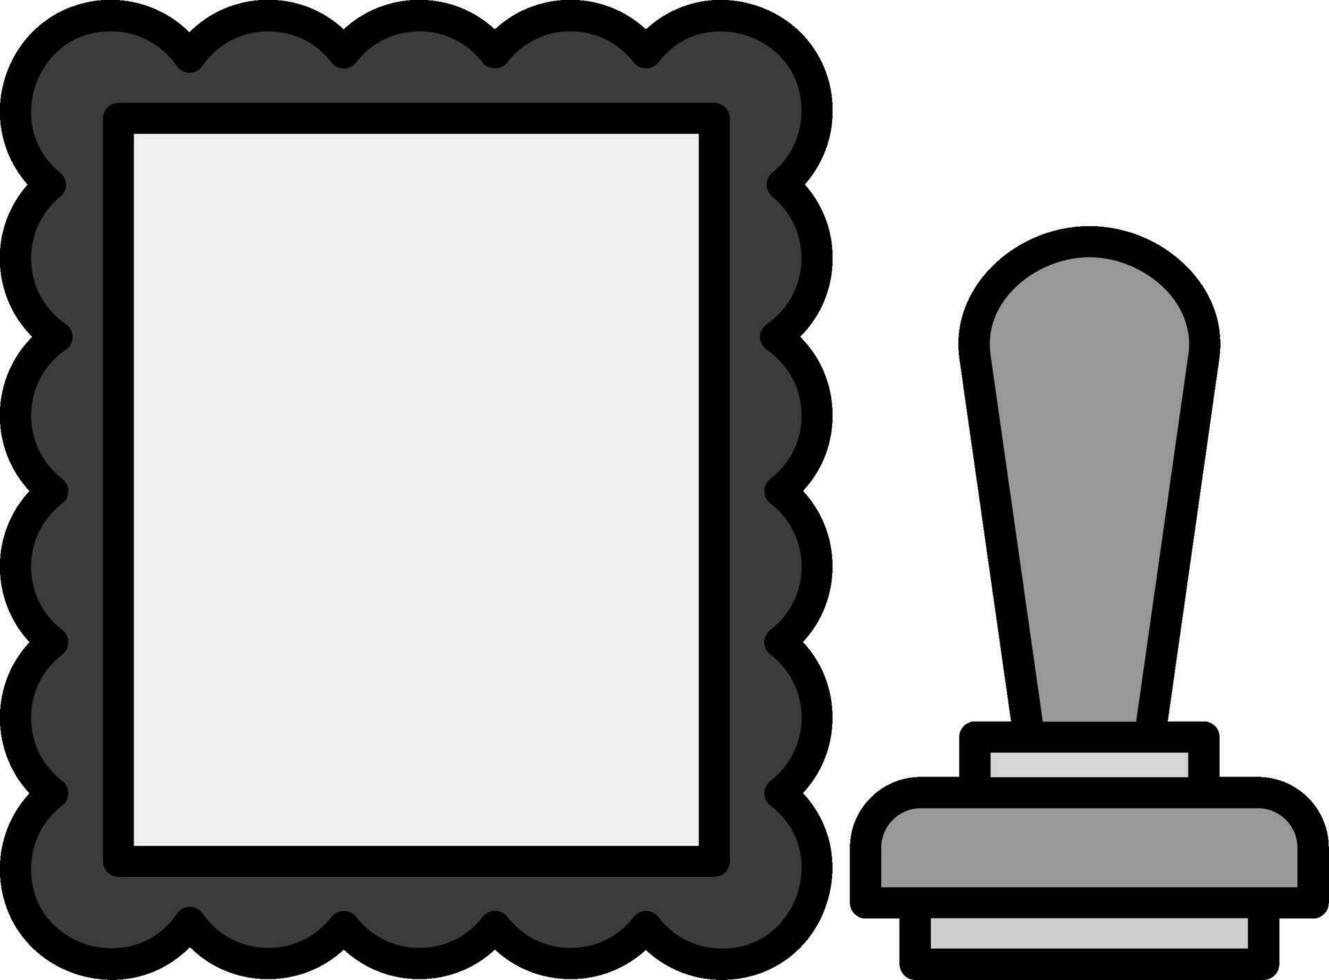 stamped Vector Icon